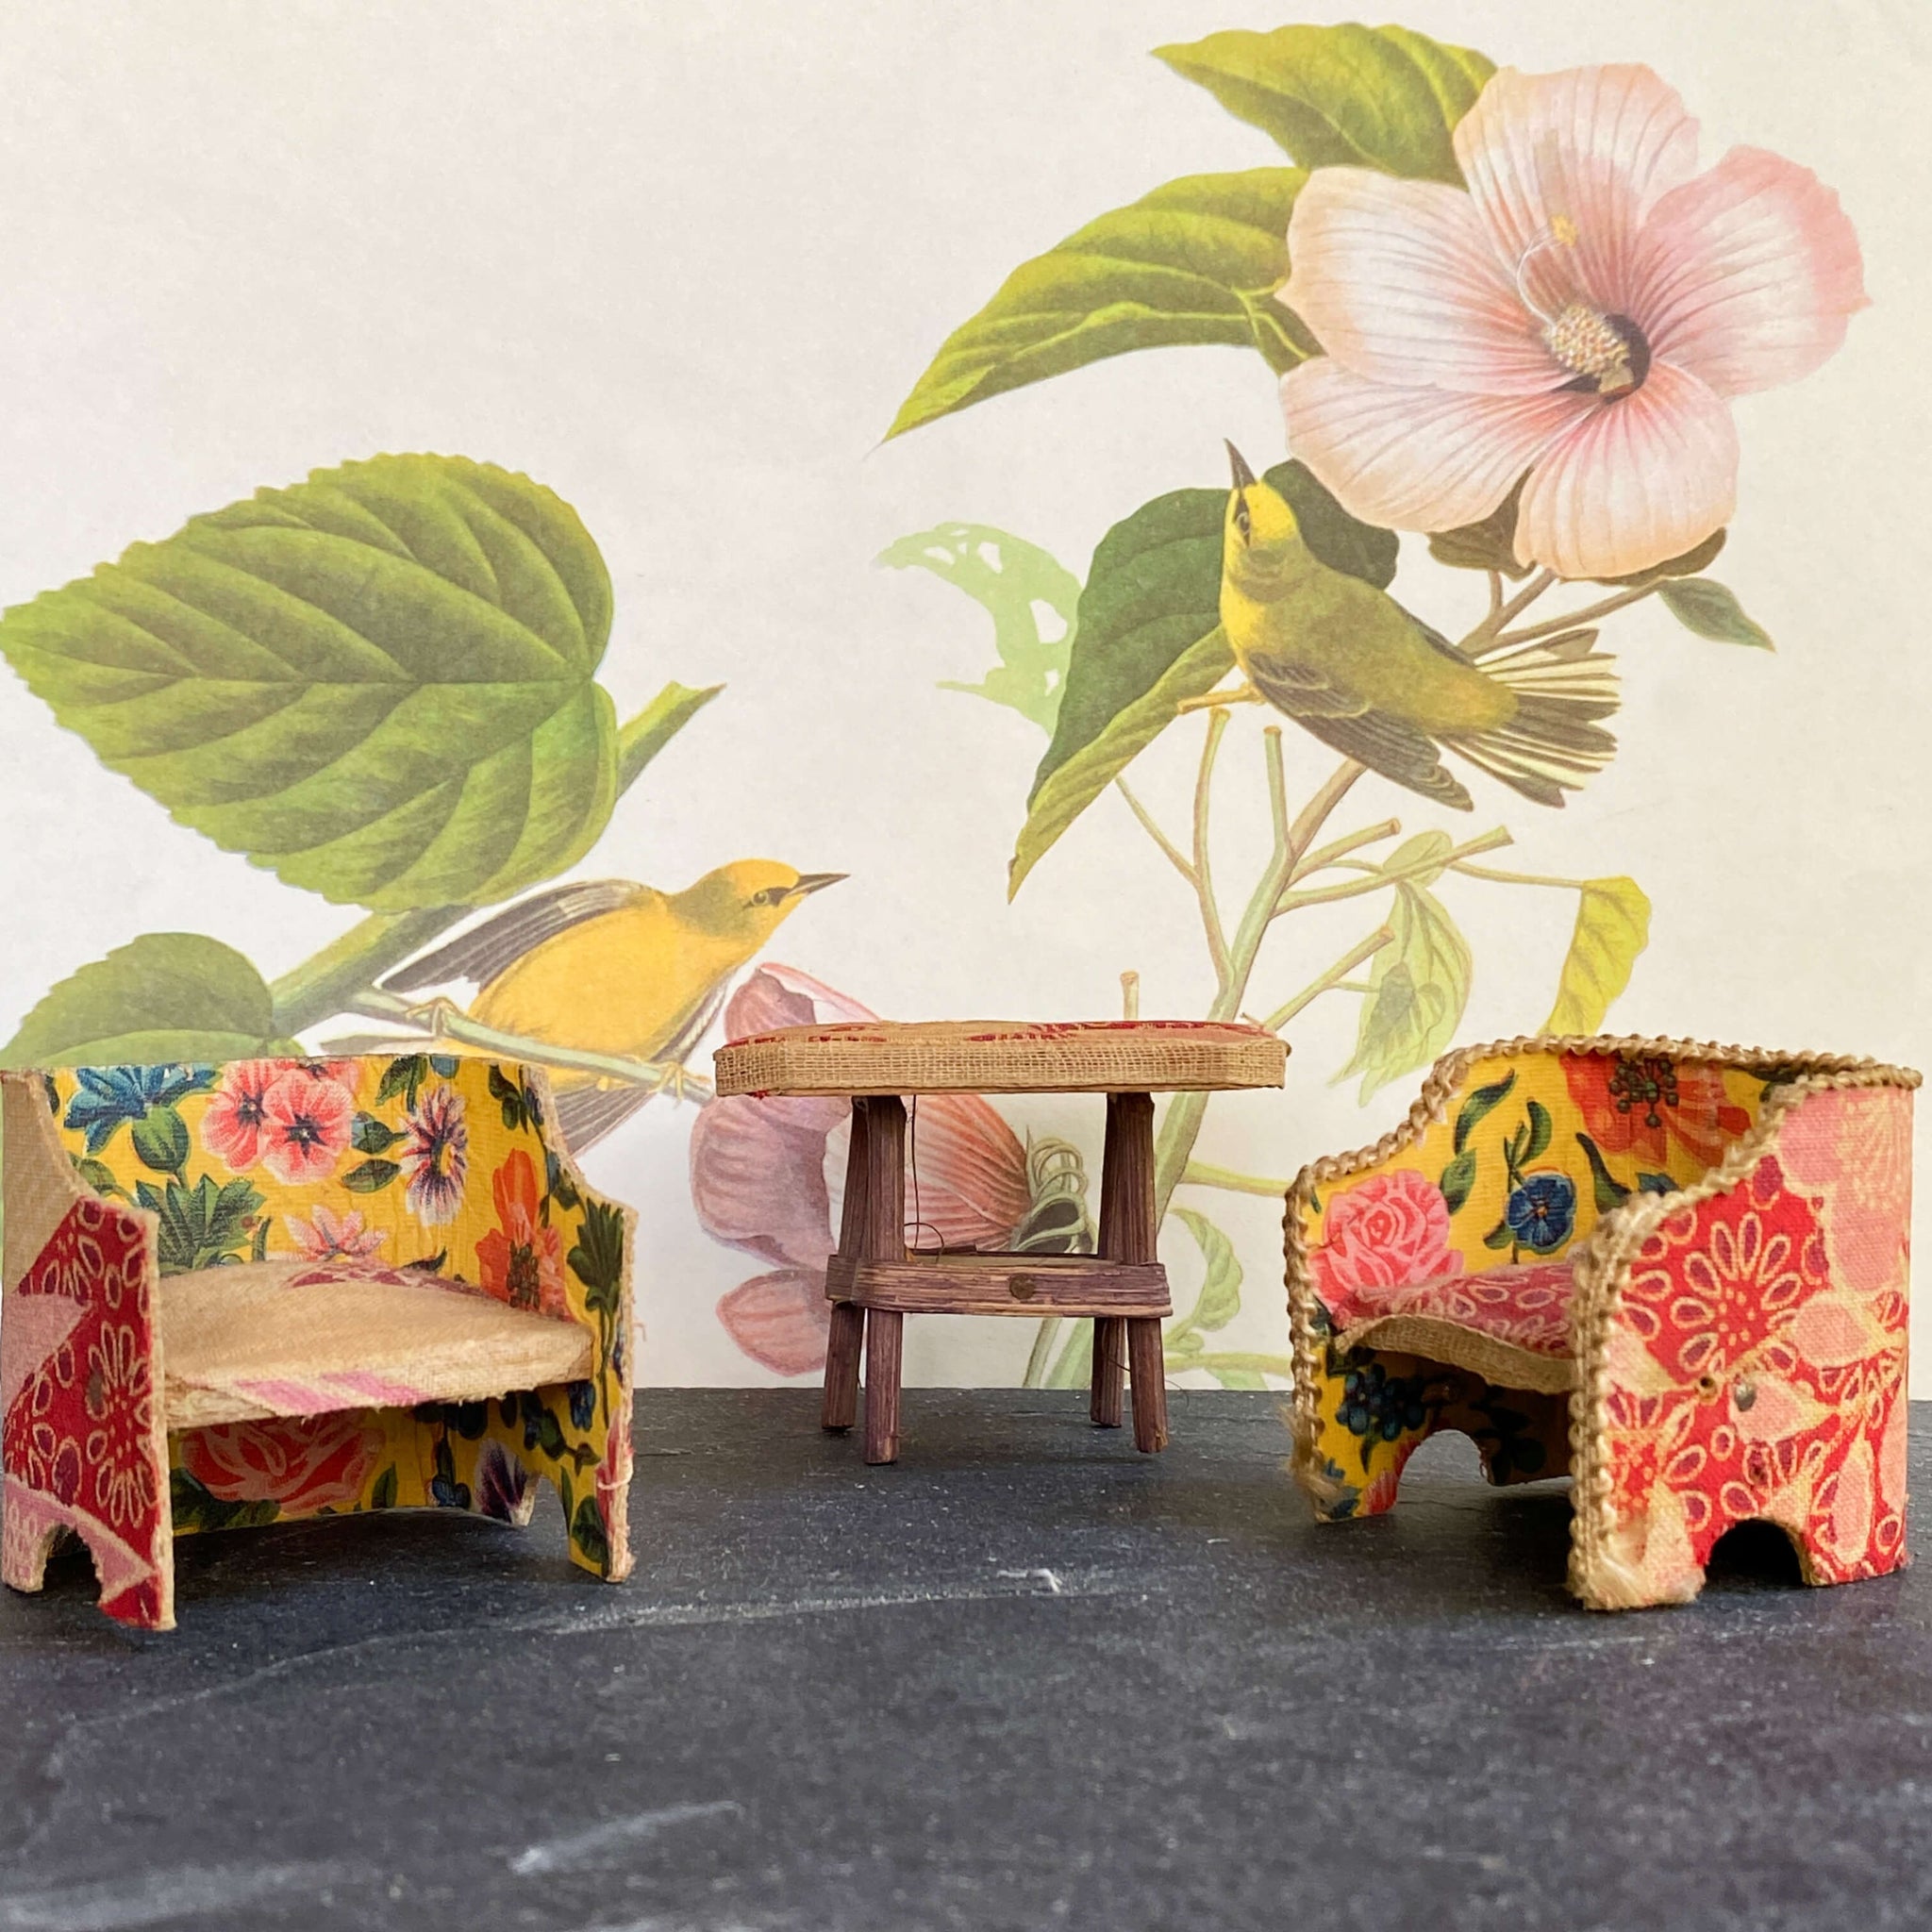 Vintage 1970s Dollhouse Furniture - Floral Fabric & Wood Design Made in Japan